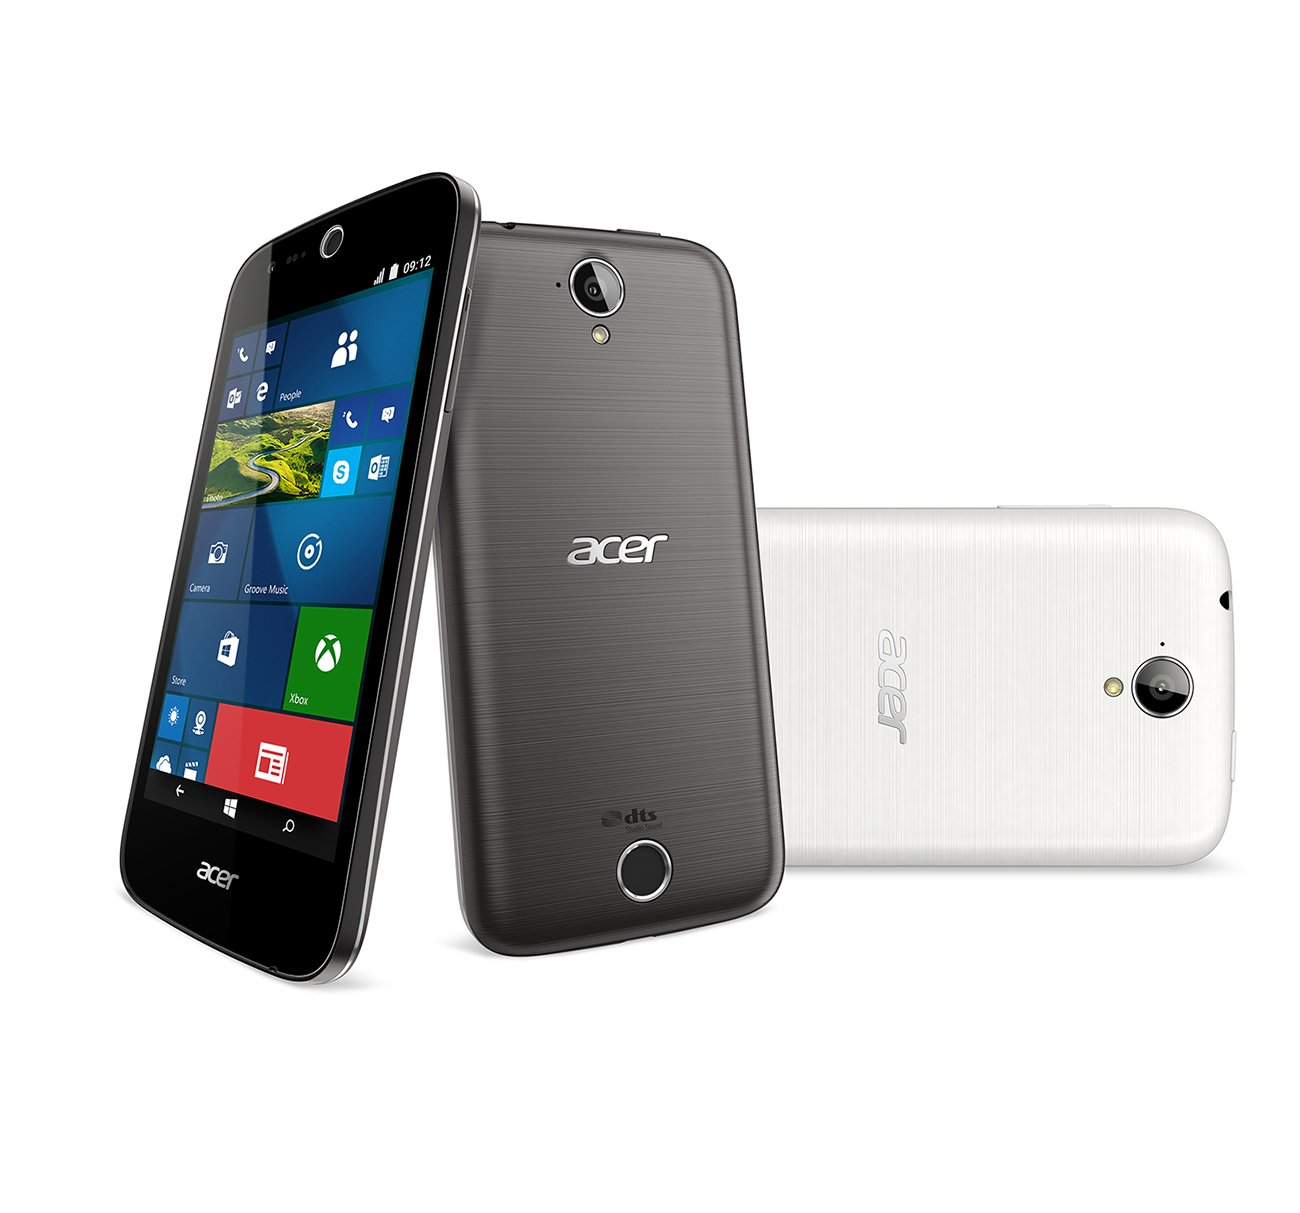 Deal: Acer Liquid M330 now available for $69 from Microsoft Store